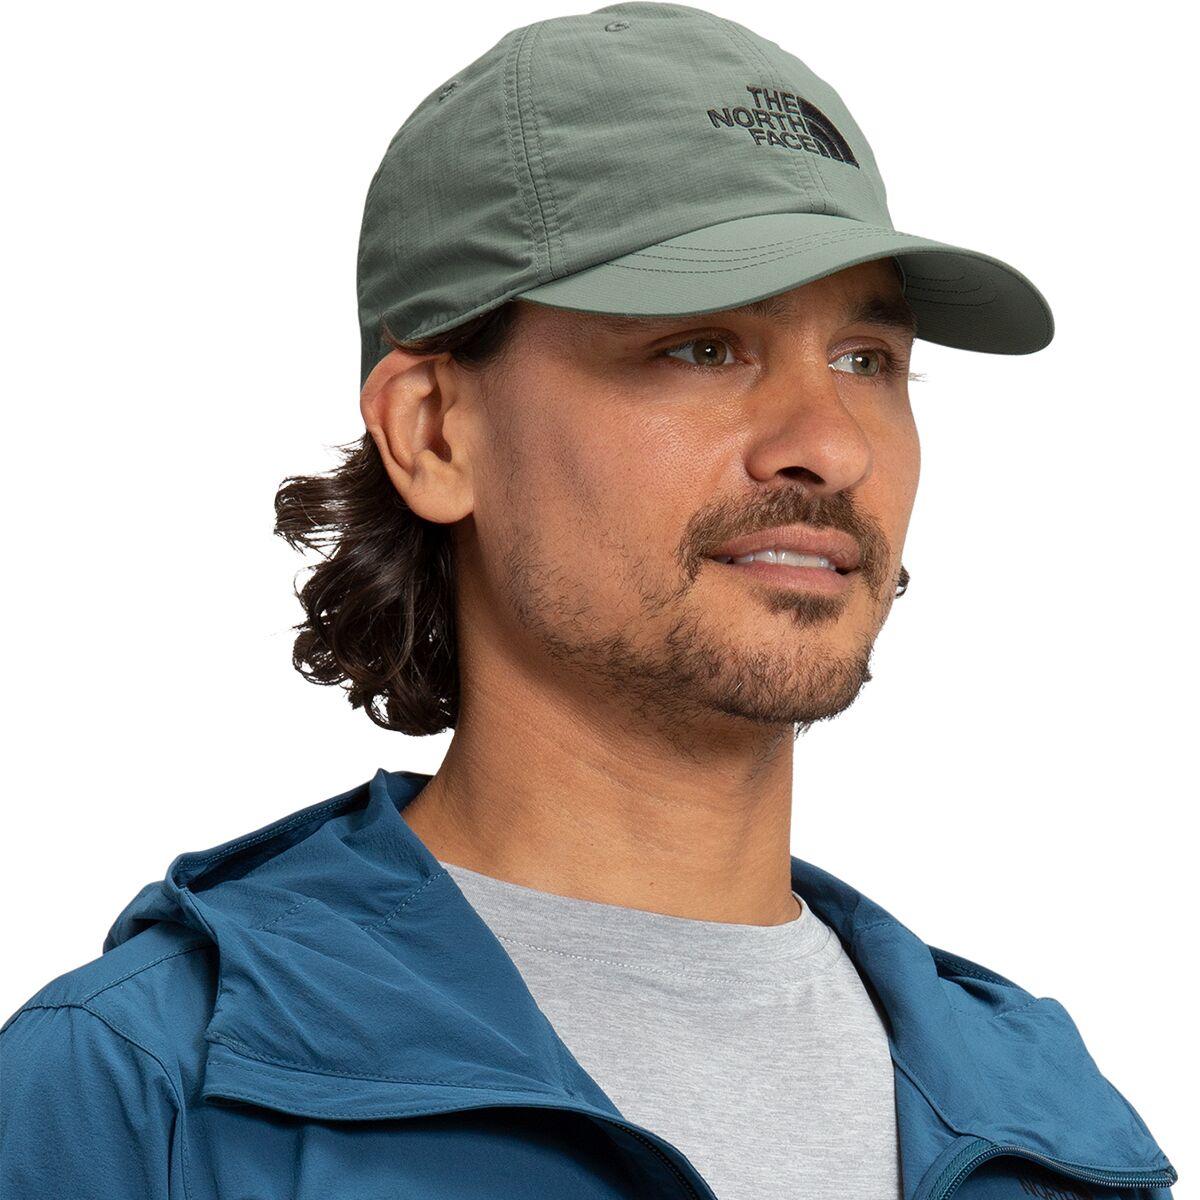 The North Face Cap Horizon Top Sellers, SAVE 40% - mpgc.net